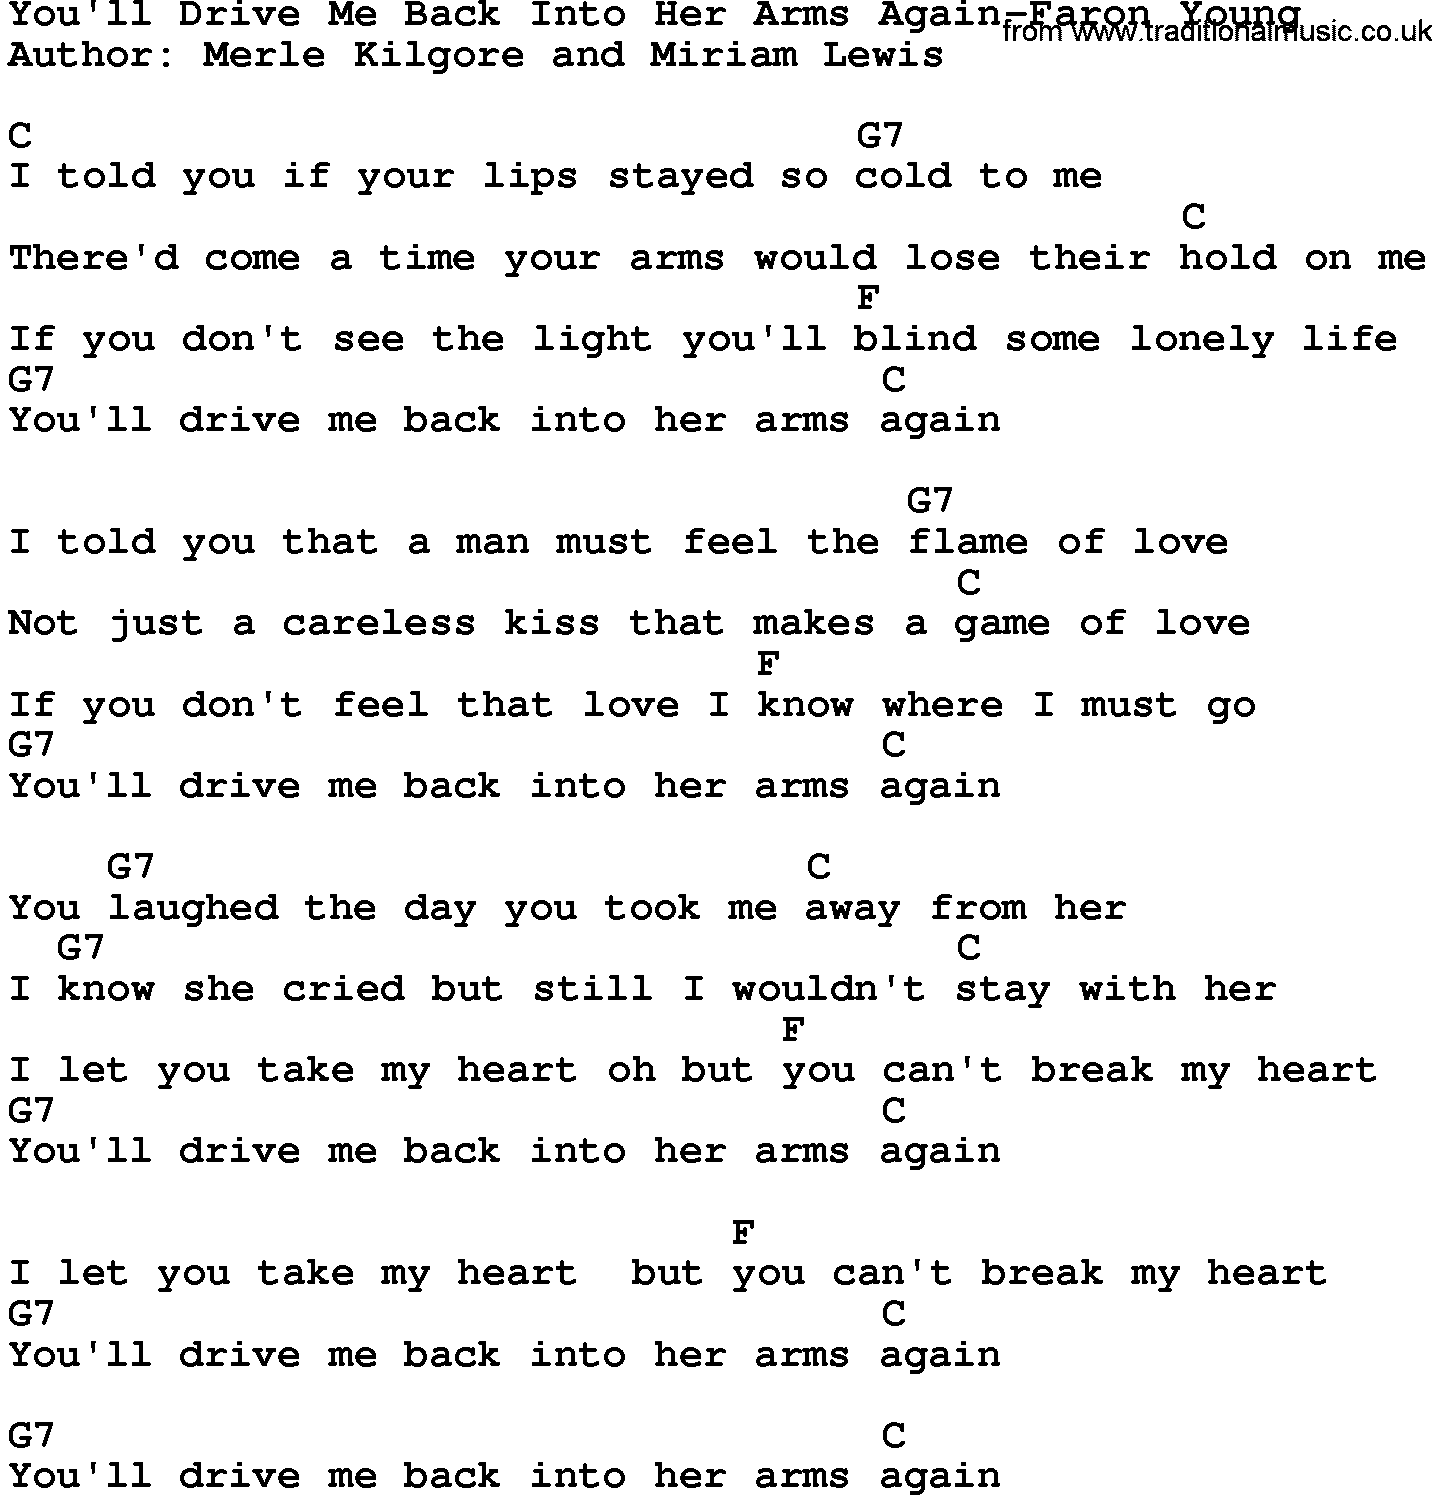 Country music song: You'll Drive Me Back Into Her Arms Again-Faron Young lyrics and chords